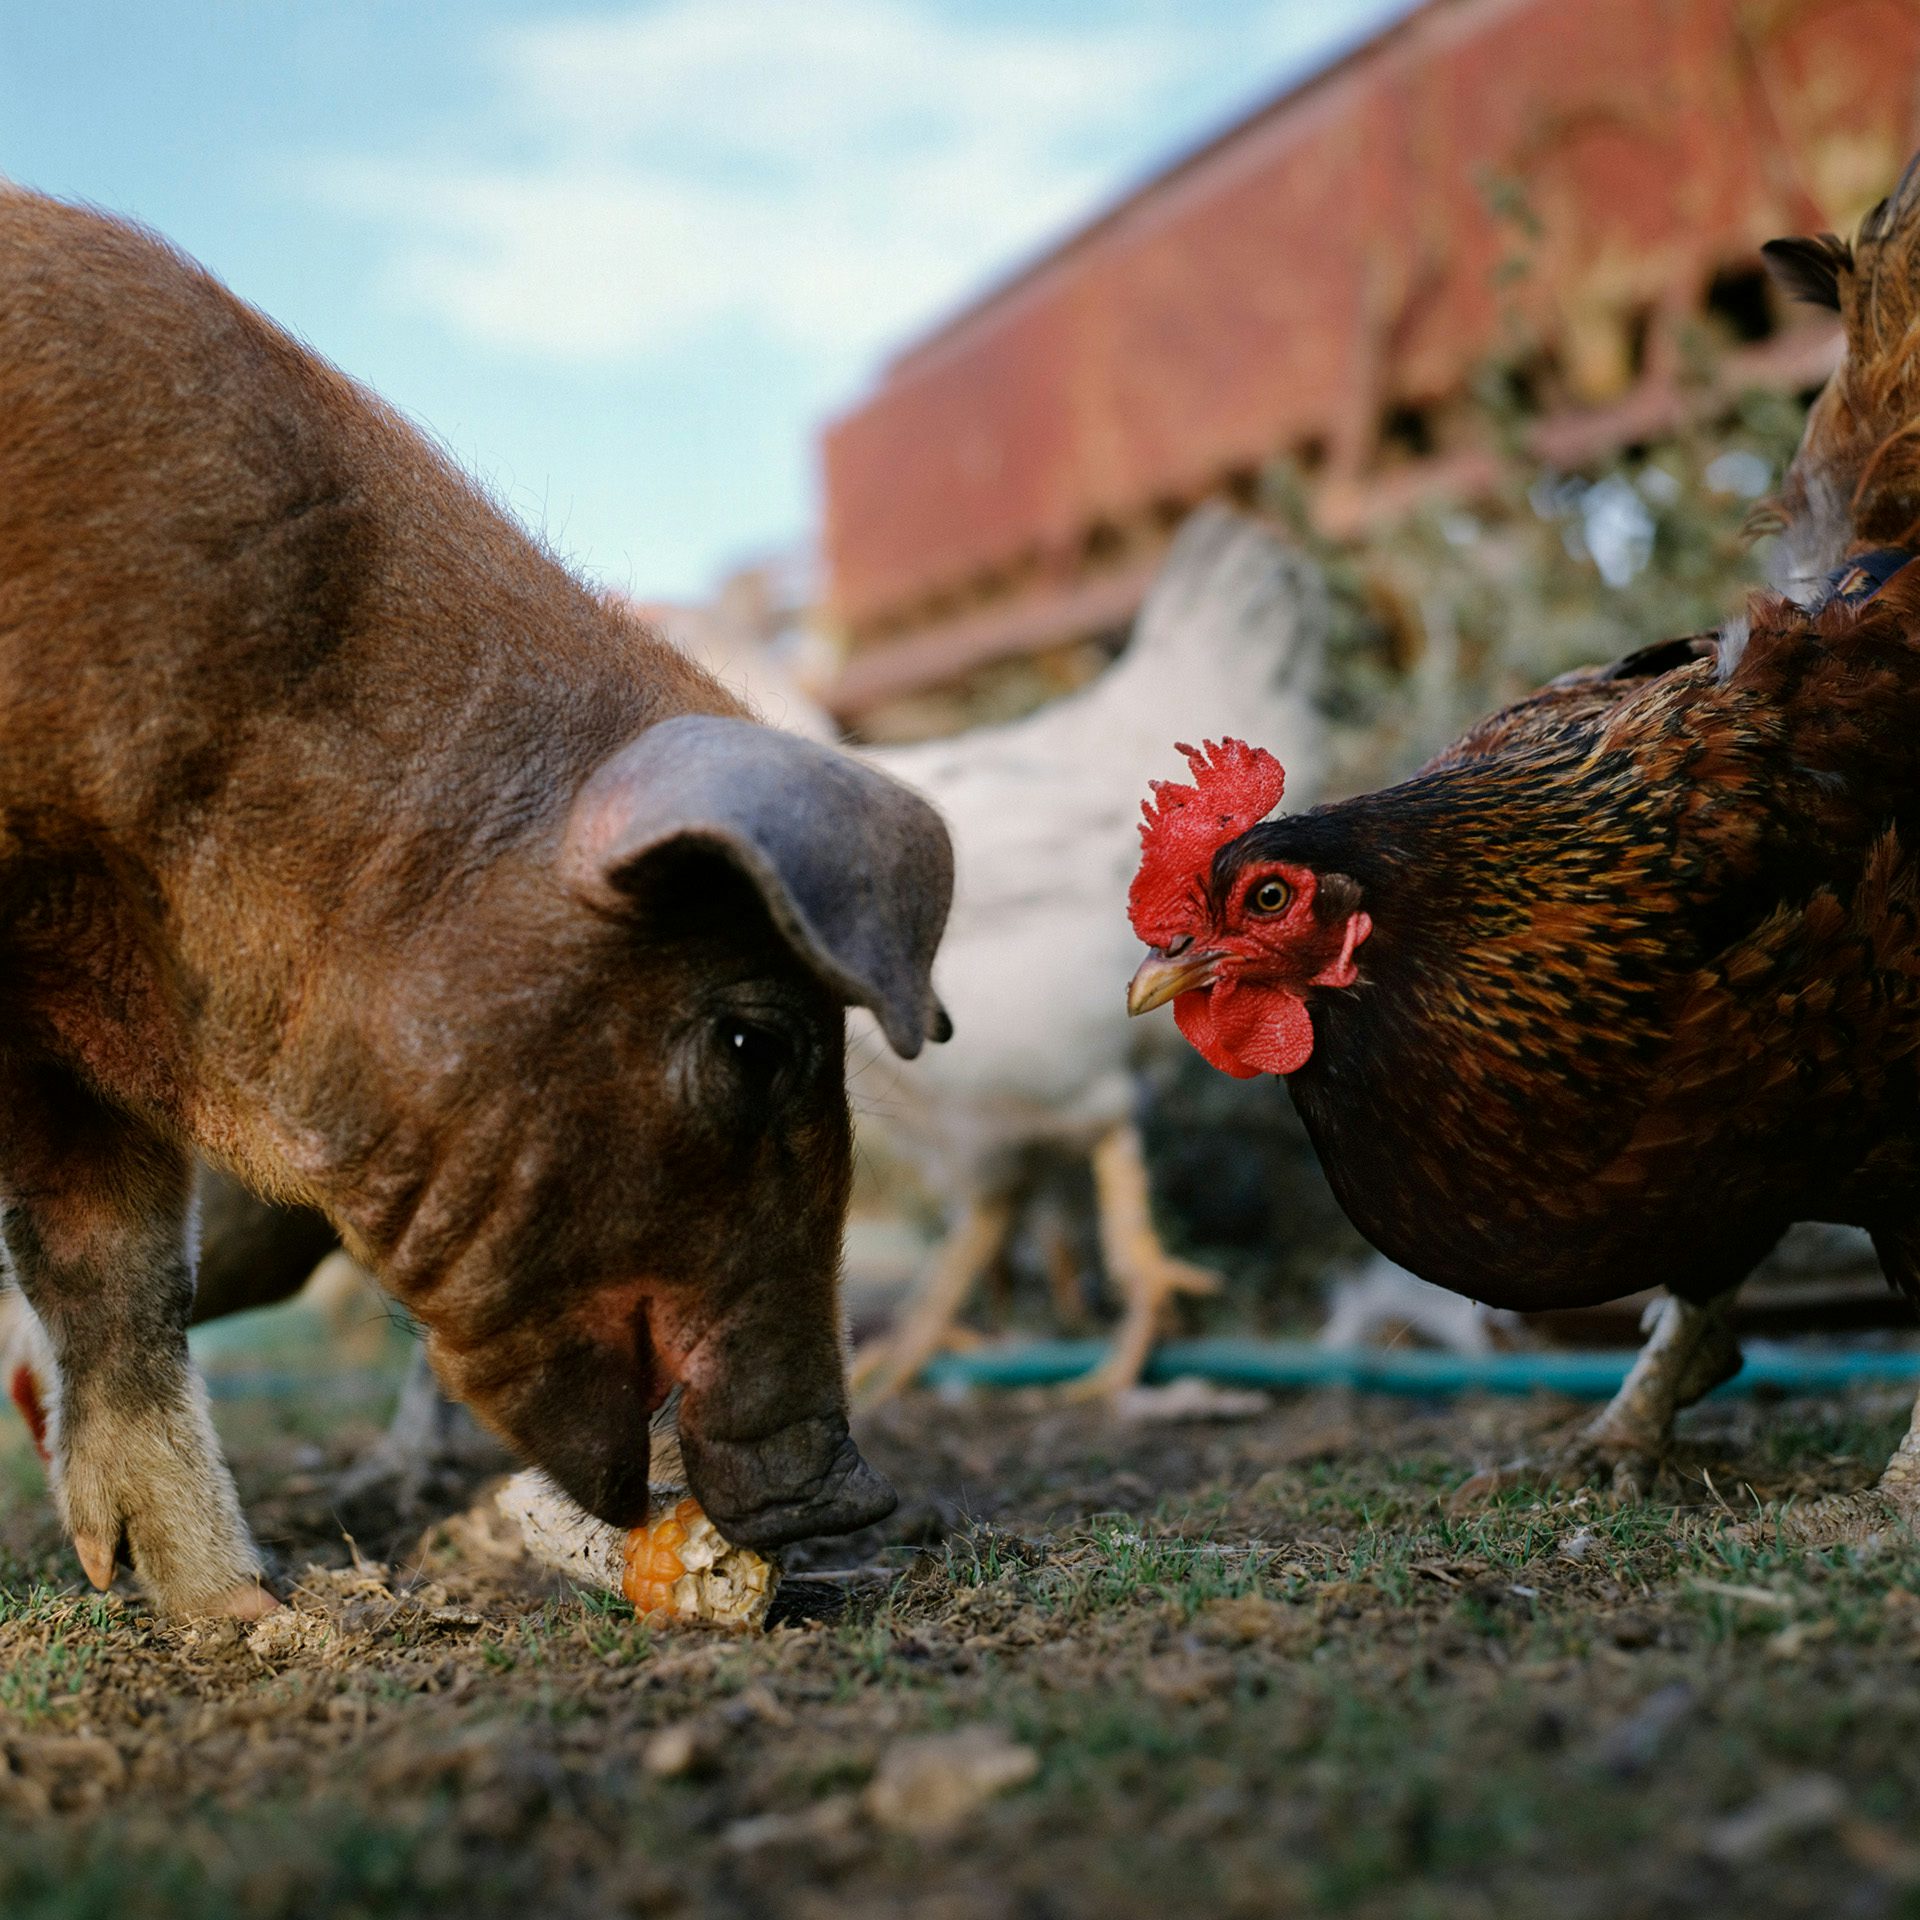 Photograph by Alessandra Sanguinetti showing a pig eating corn off the ground with a chicken facing it